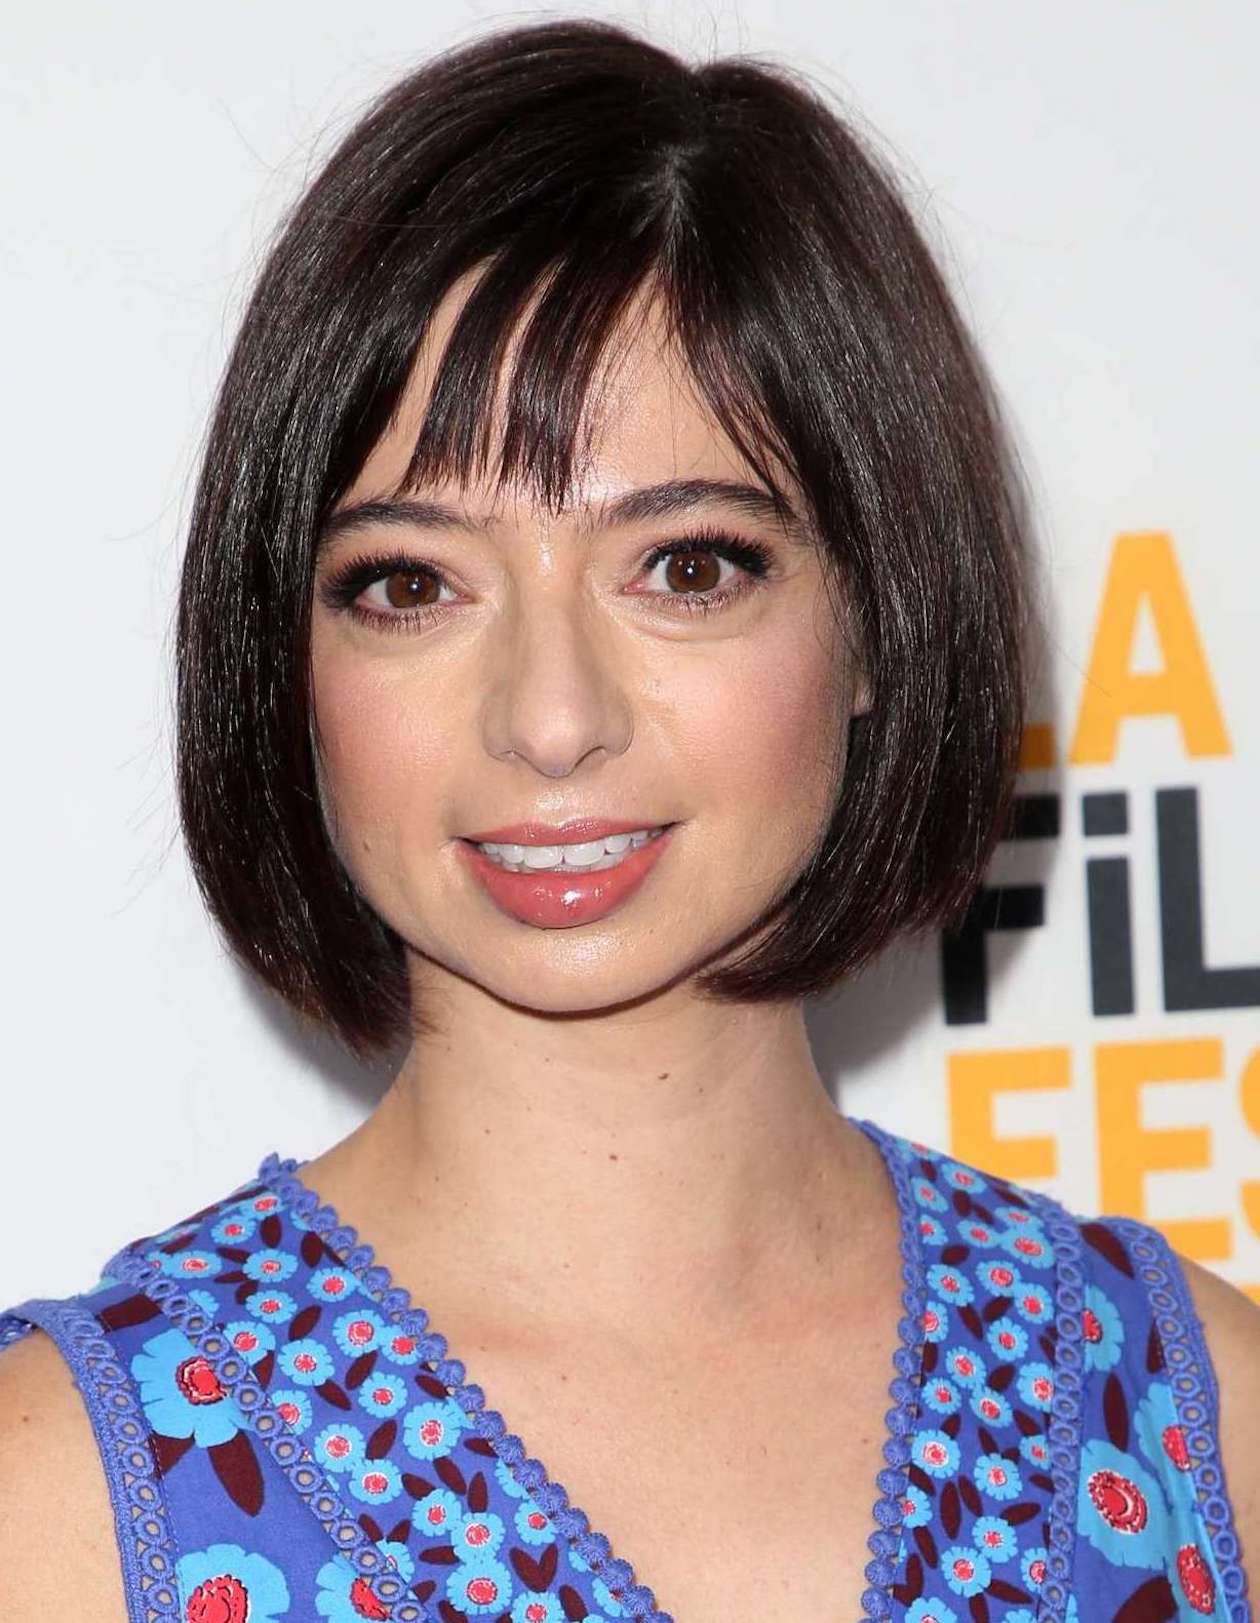 How tall is Kate Micucci?